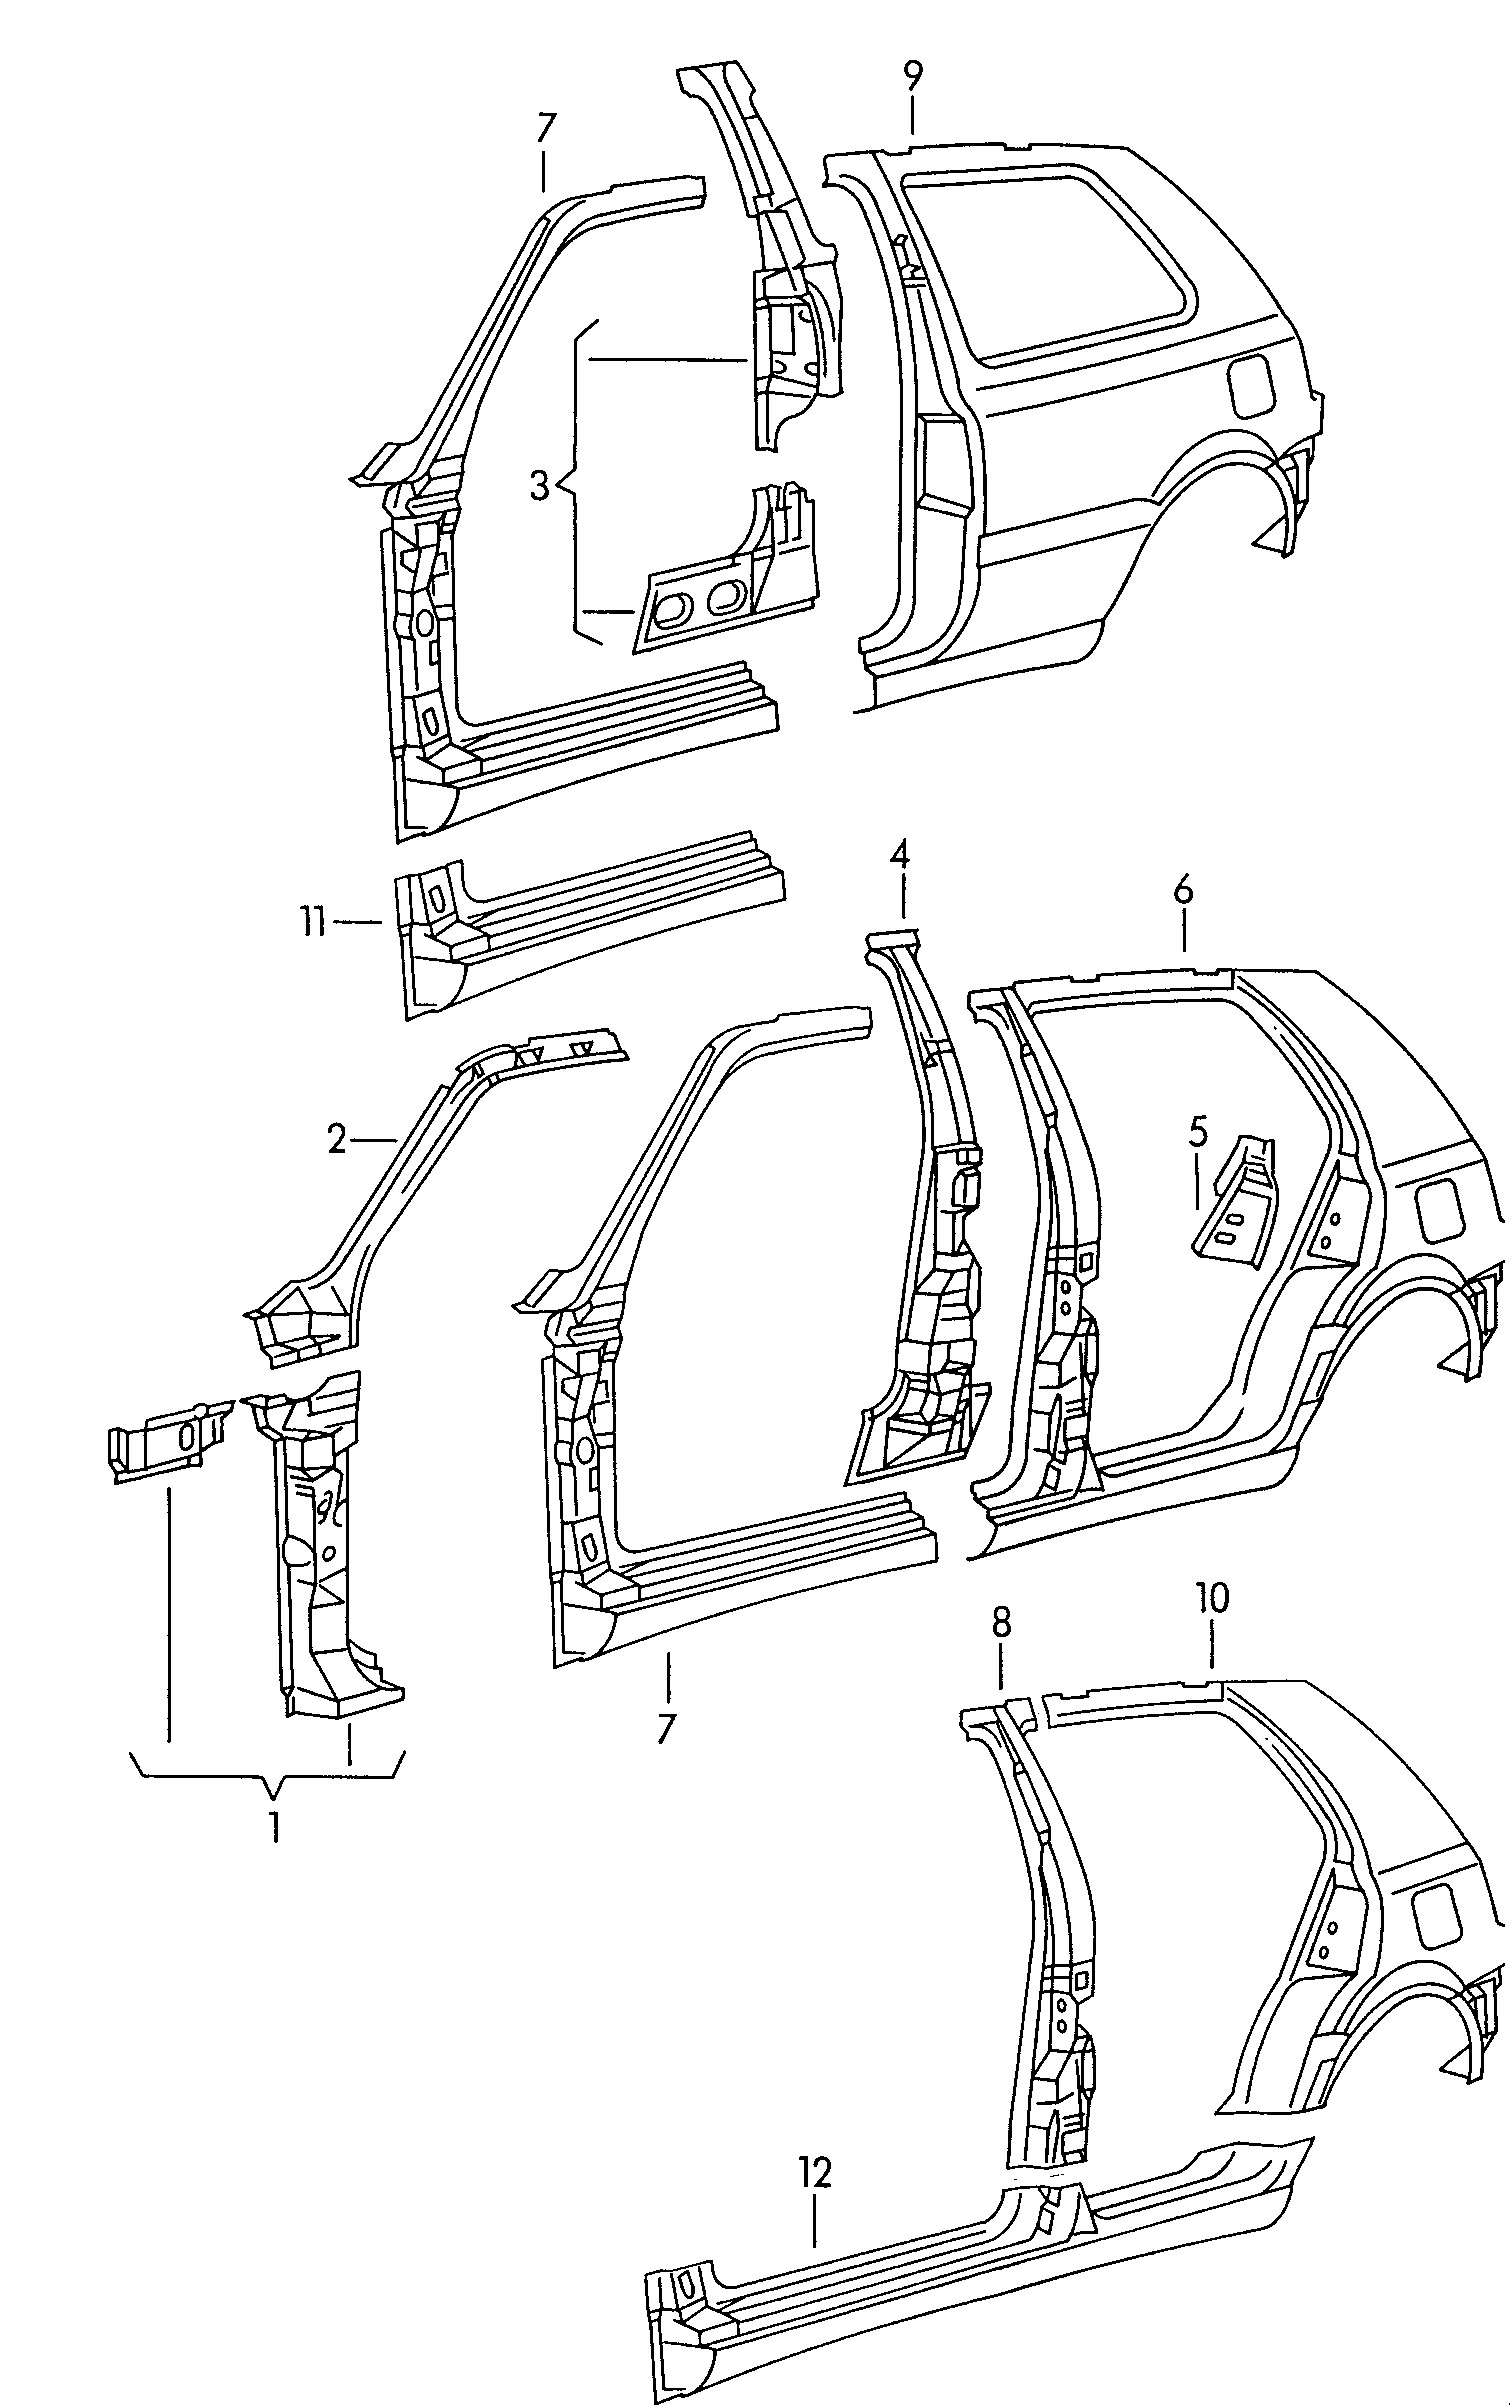 Sectional parts for the<br>side section  - Jetta - jem